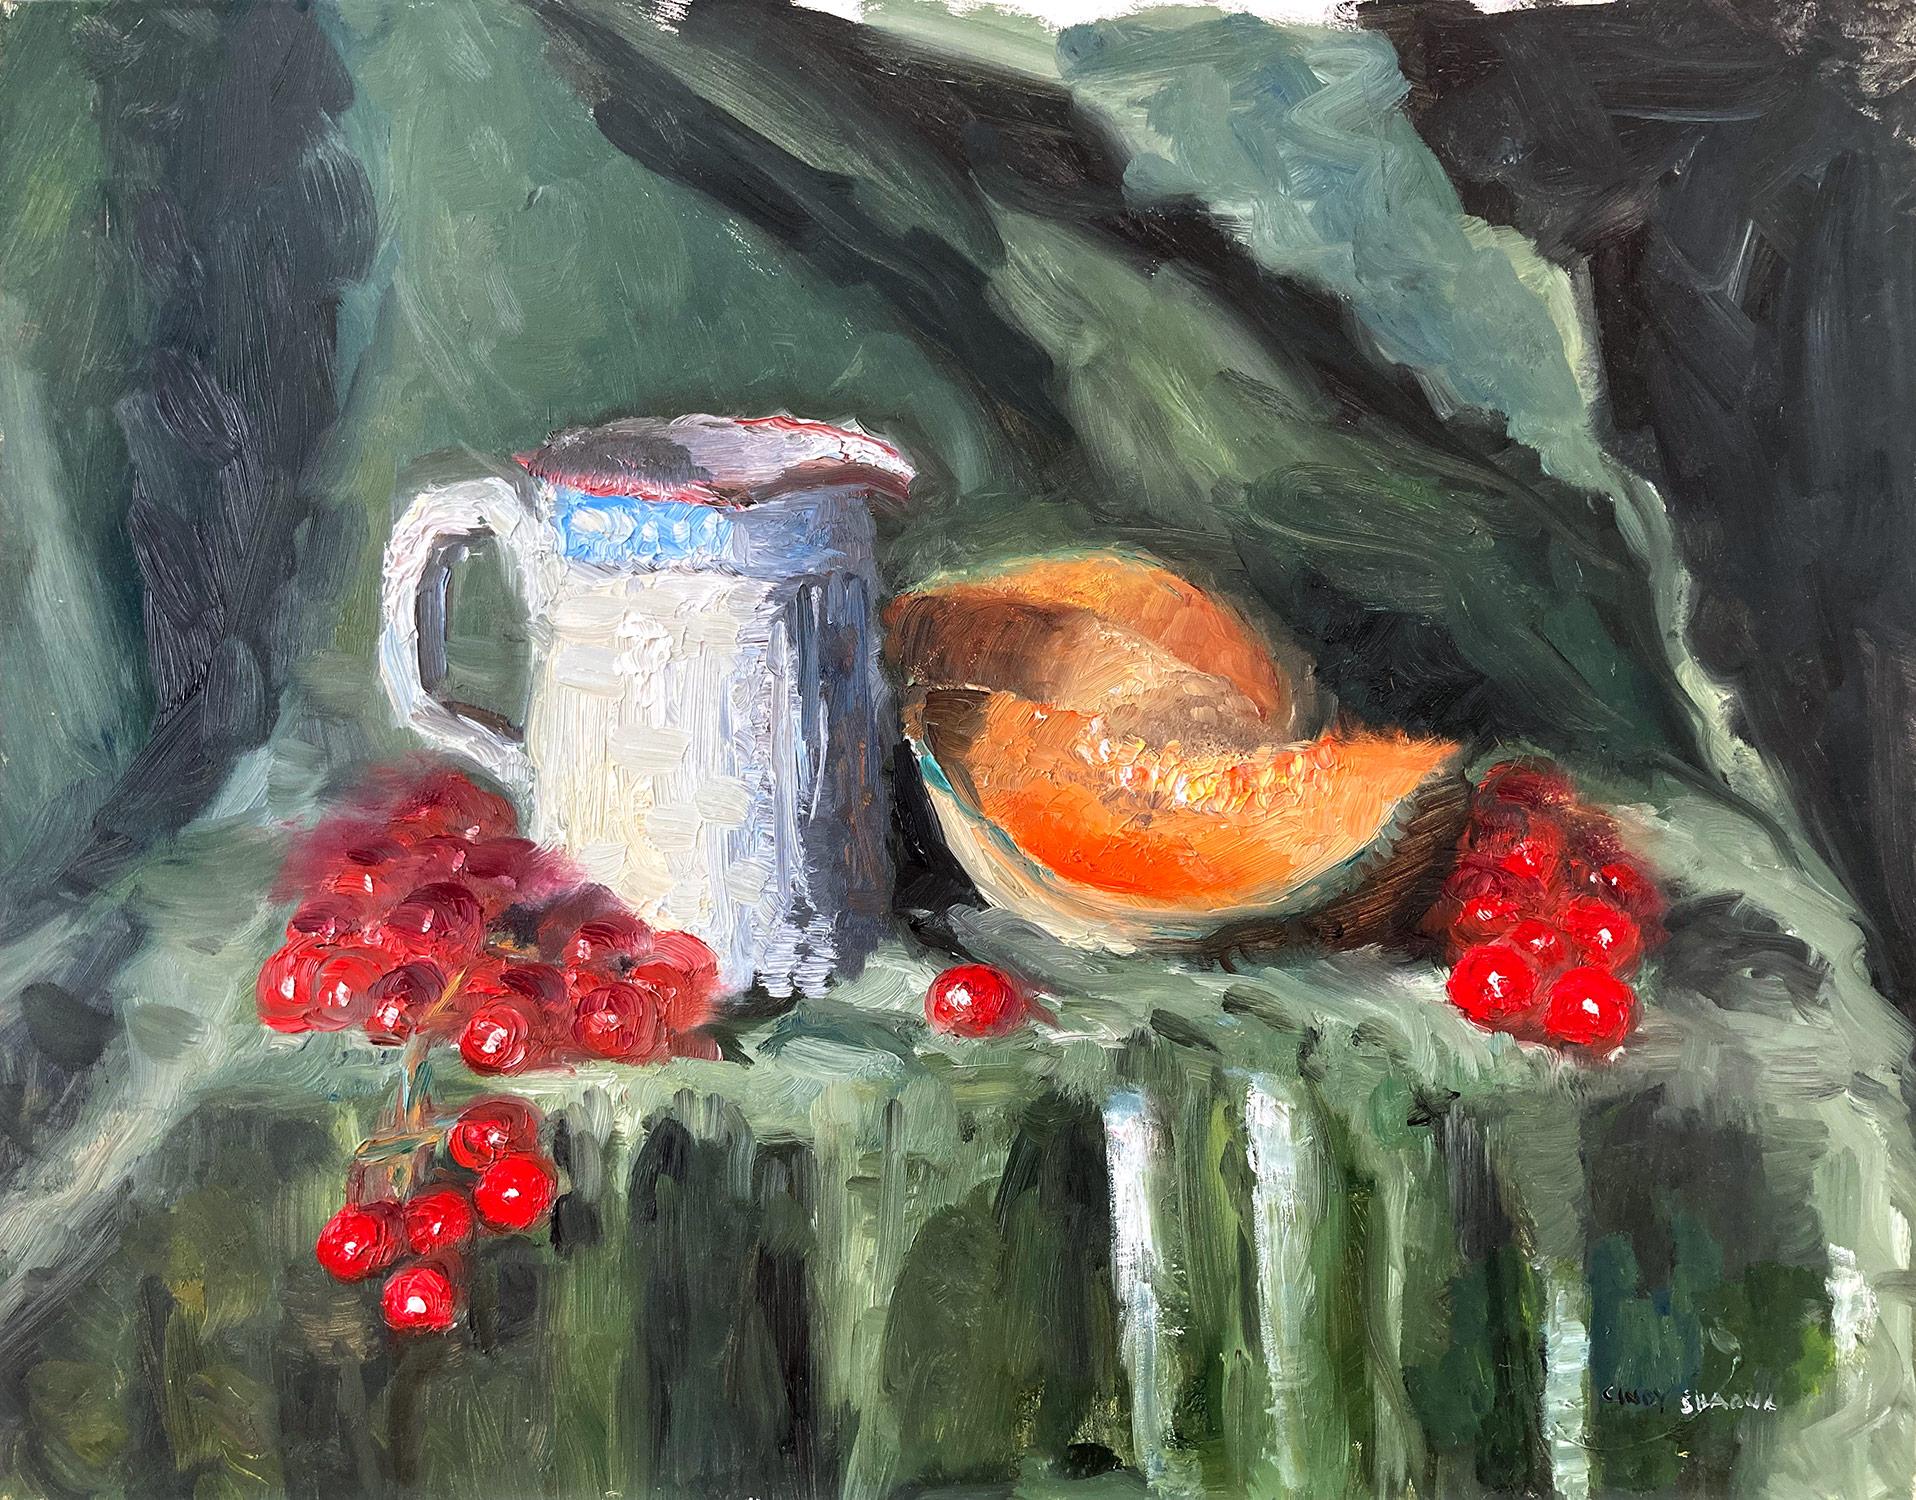 Cindy Shaoul Abstract Painting - "Water Jug with Grapes" Impressionistic Colorful Contemporary Oil Painting 